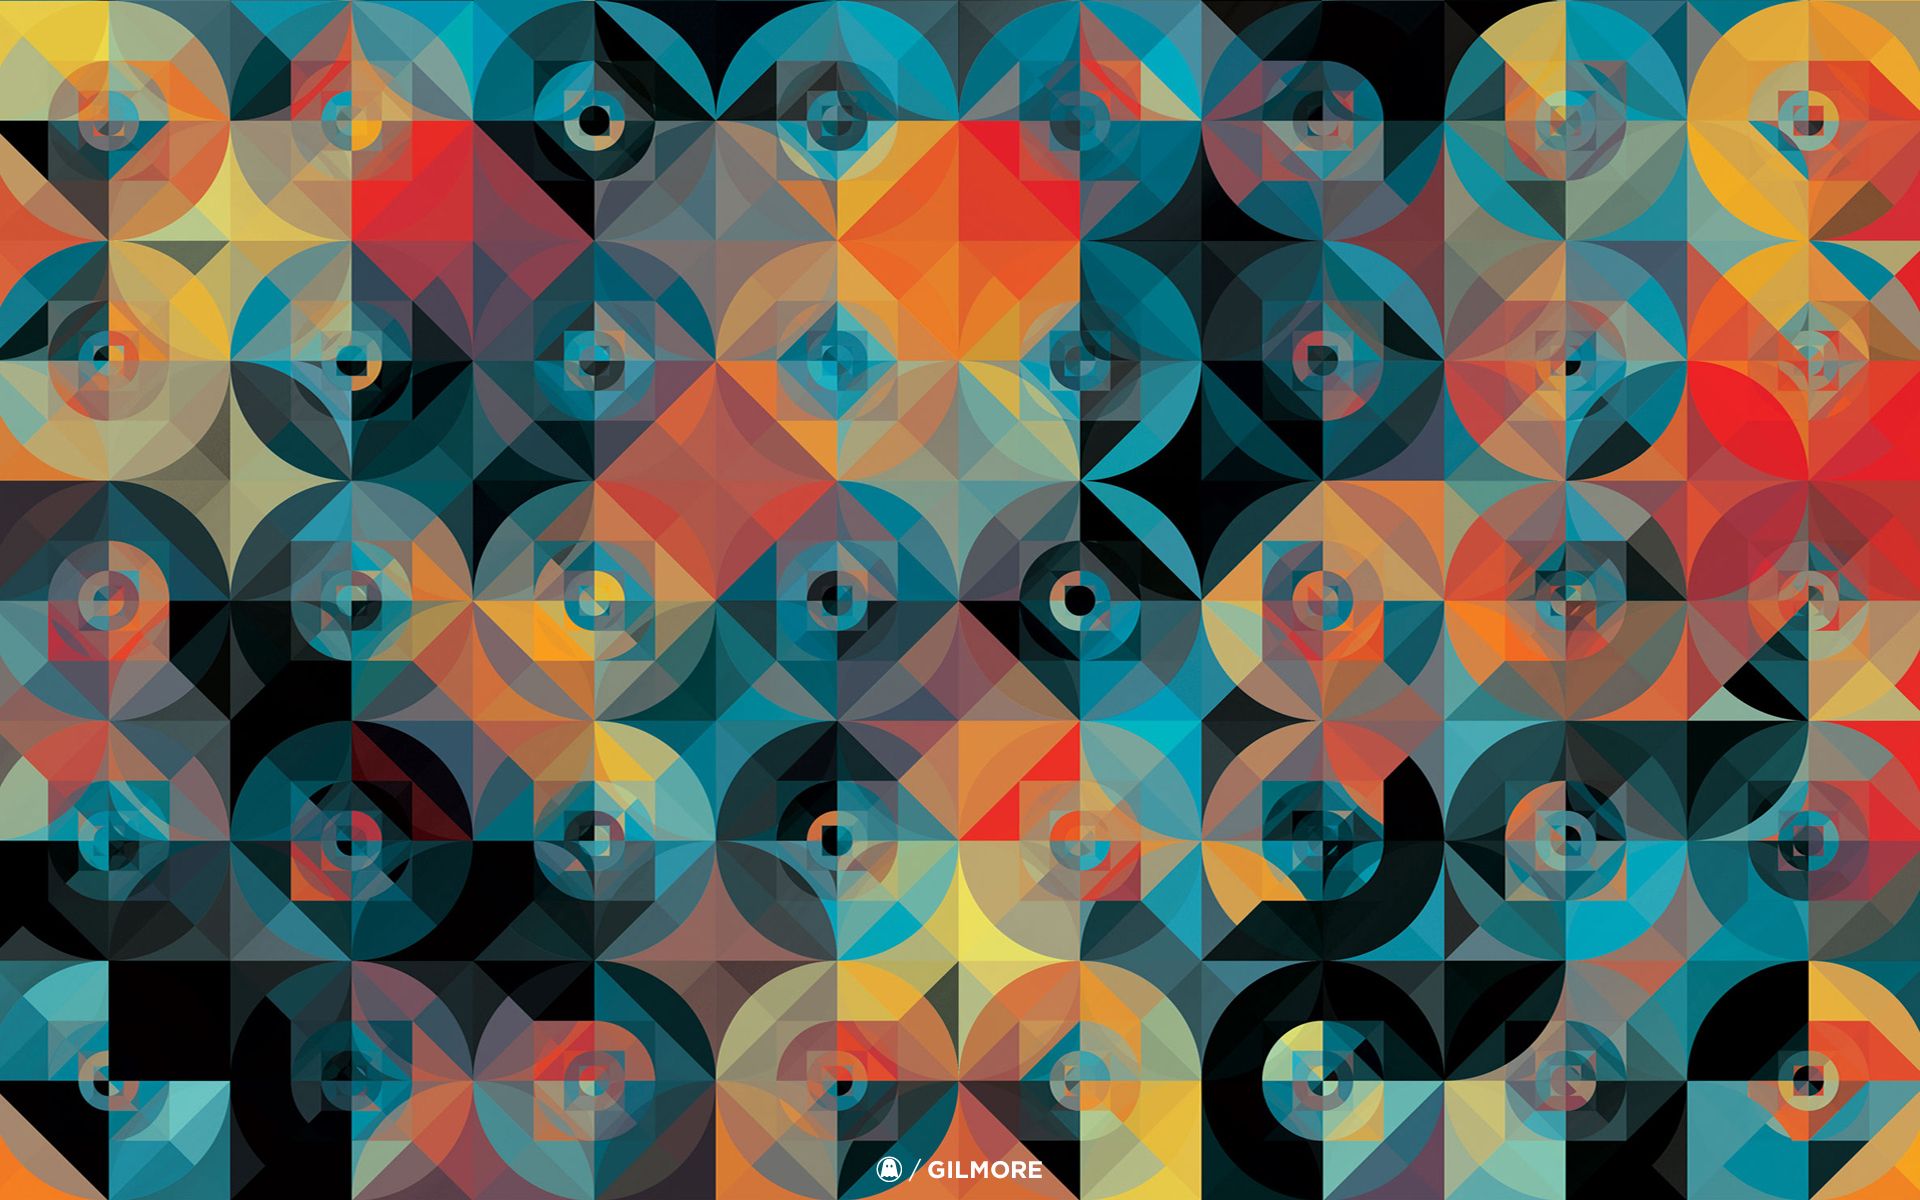 Andy Gilmore's dazzling geometry. Sacred geometry wallpaper, Abstract, Geometric art